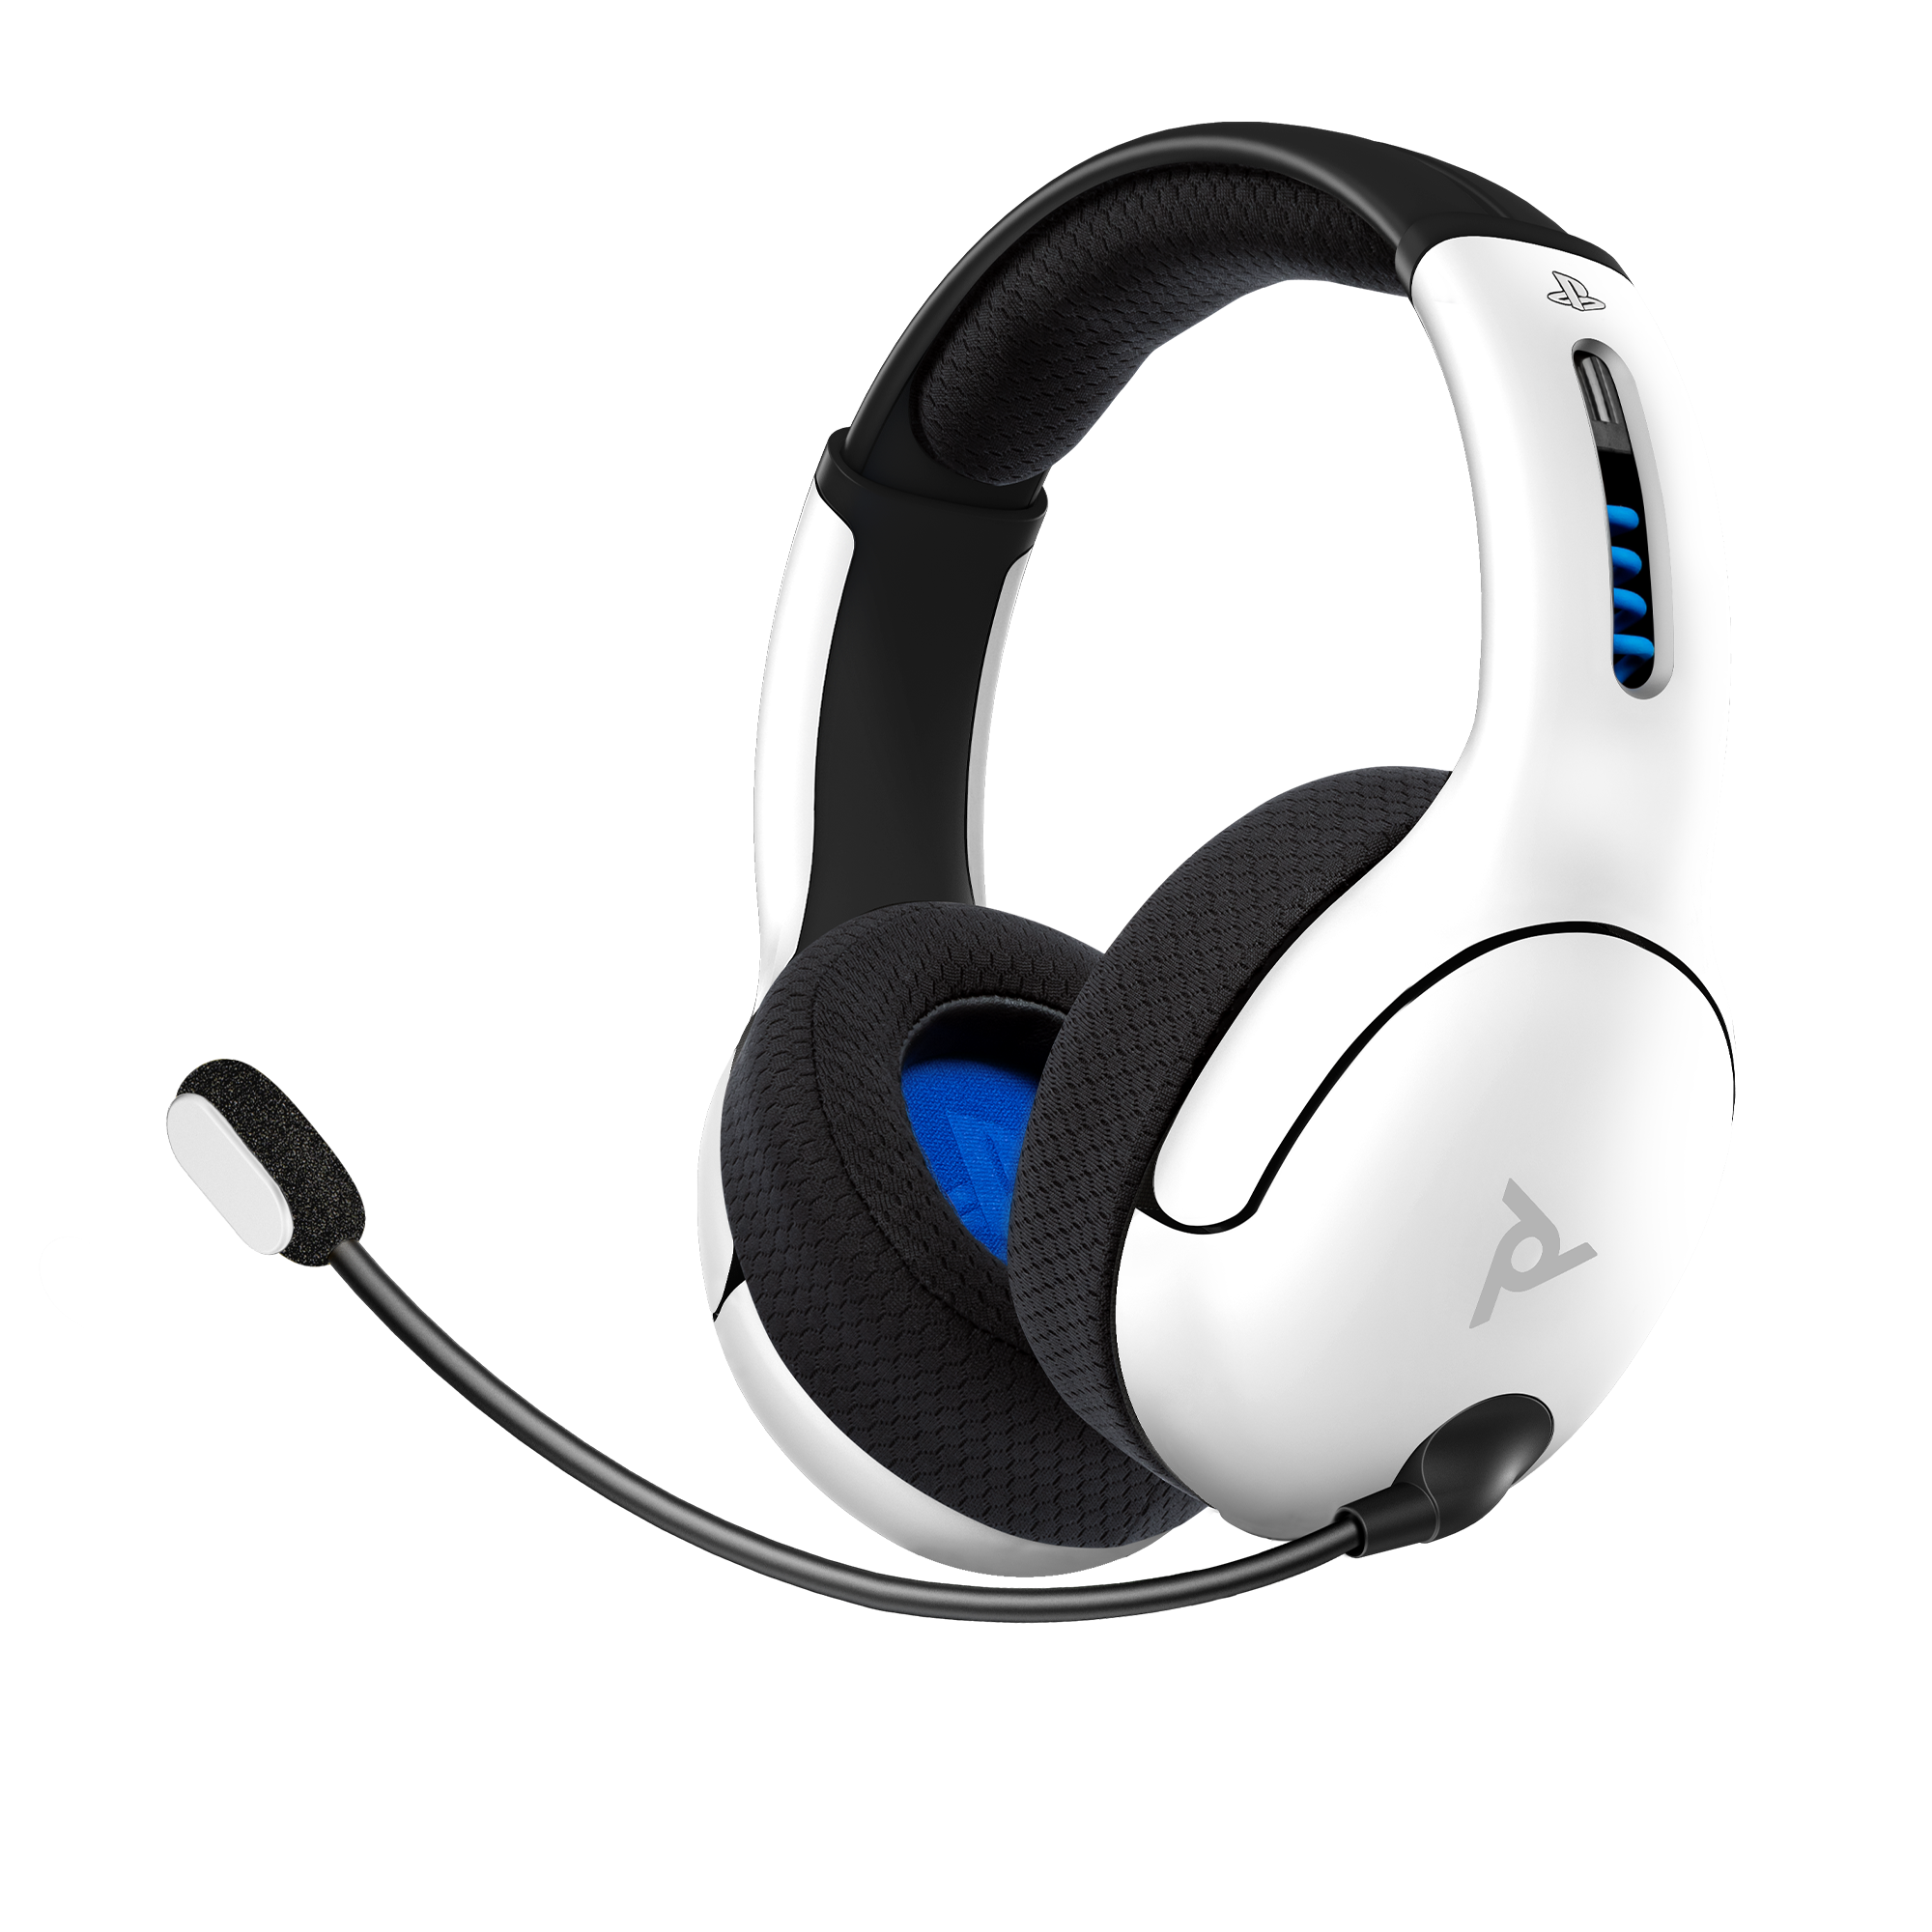 Privilegium anspore brændstof PDP Gaming LVL50 Wireless Stereo Headset for PS4 White | PlayStation 4 |  GameStop